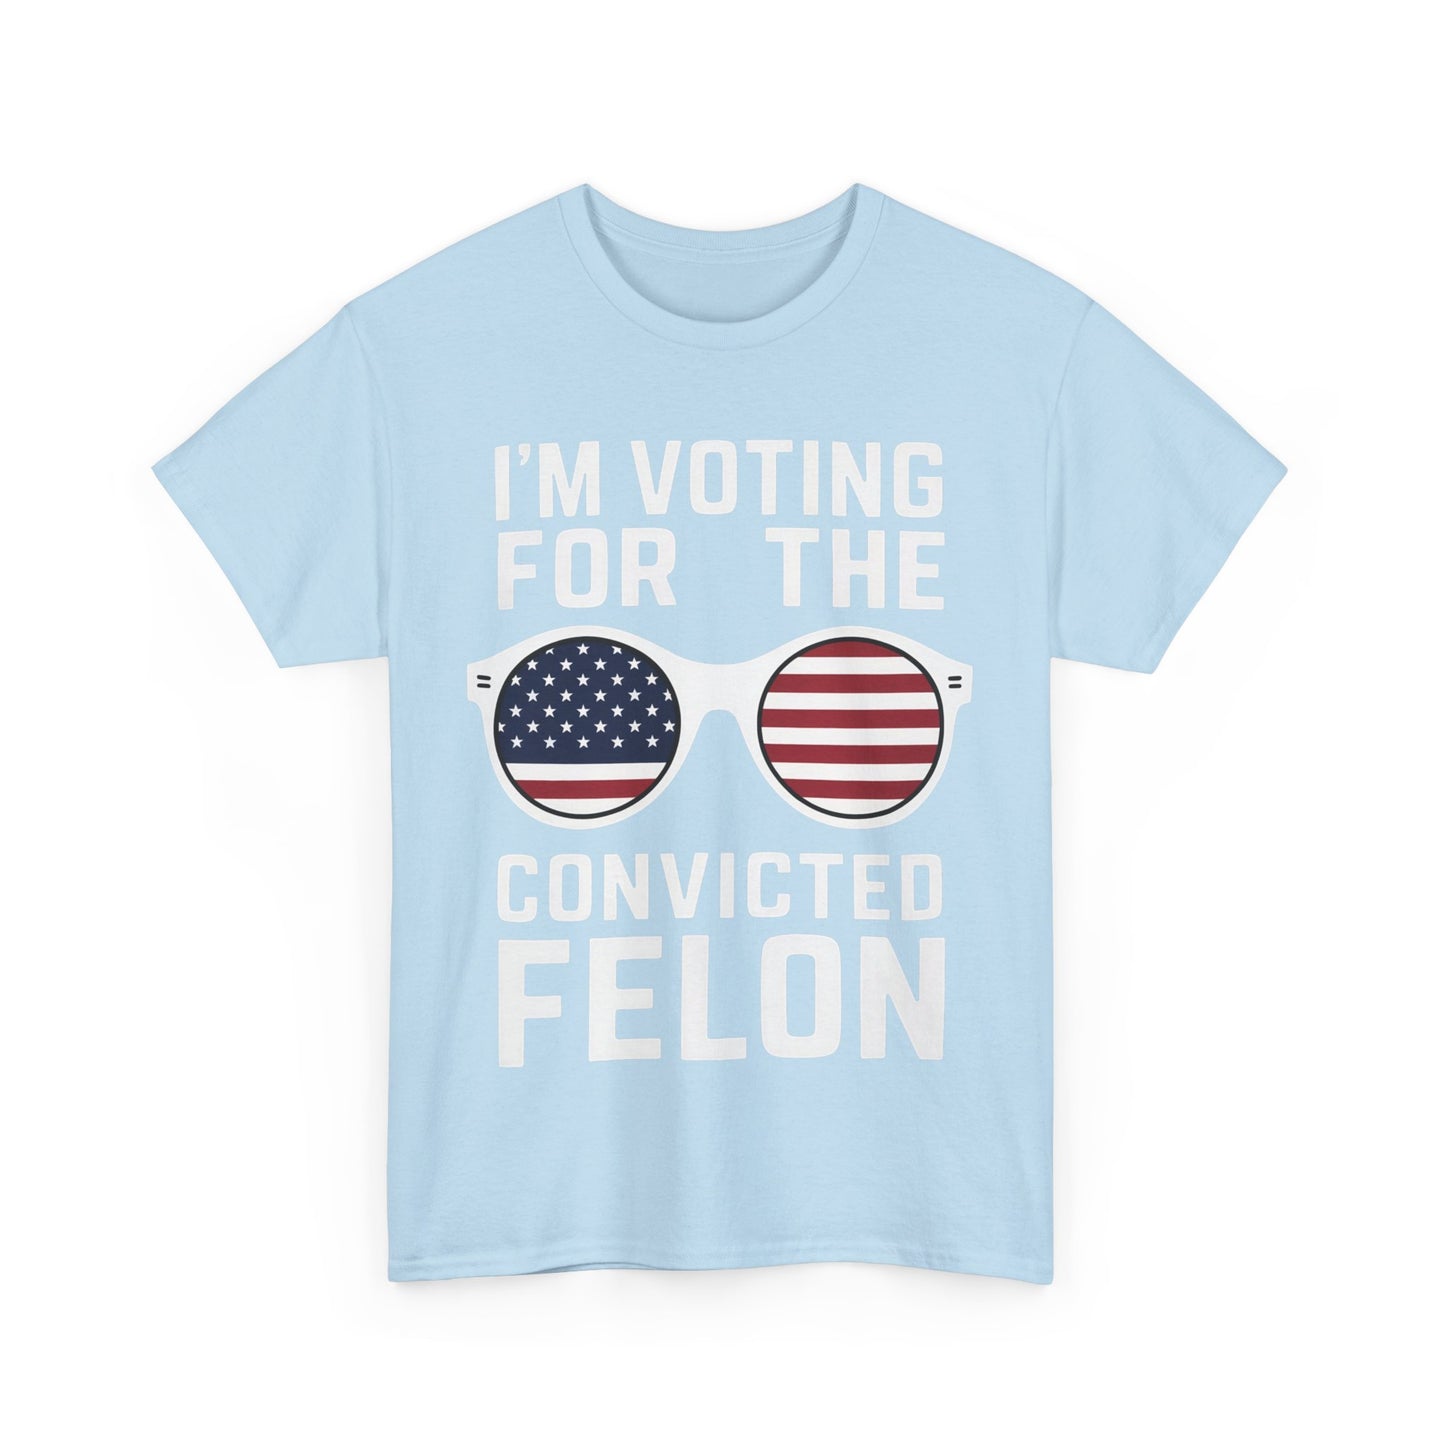 Get trendy with "I'm Voting for the convicted felon" Unisex Heavy Cotton Tee - T-Shirt available at Good Gift Company. Grab yours for $12 today!